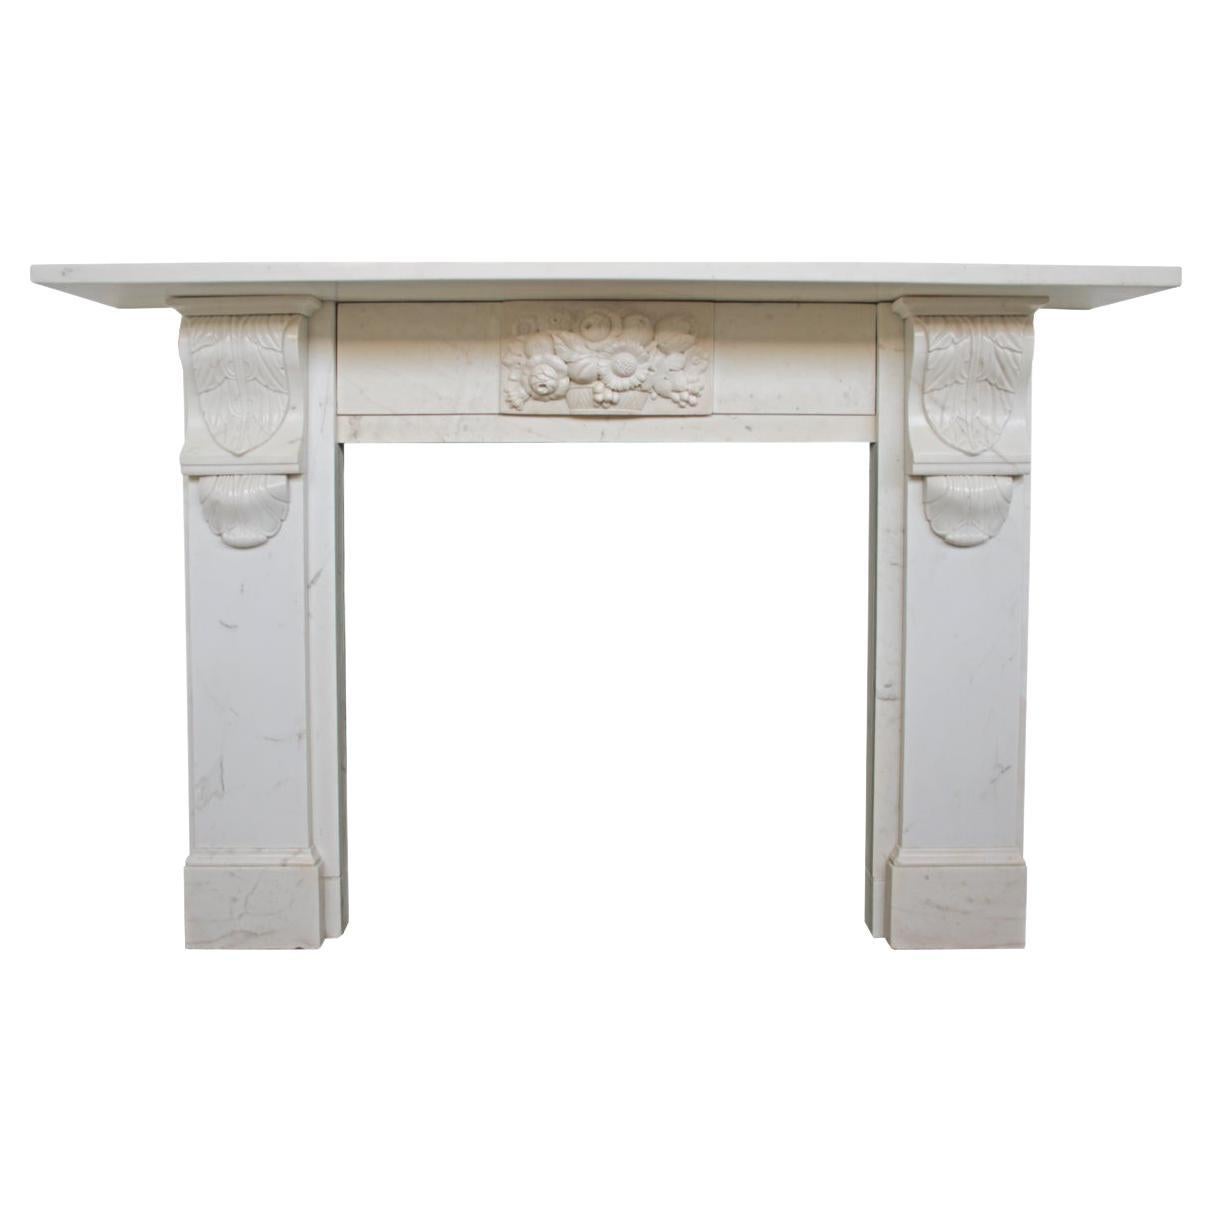 Substantial Early Victorian Statuary Marble Fireplace Surround